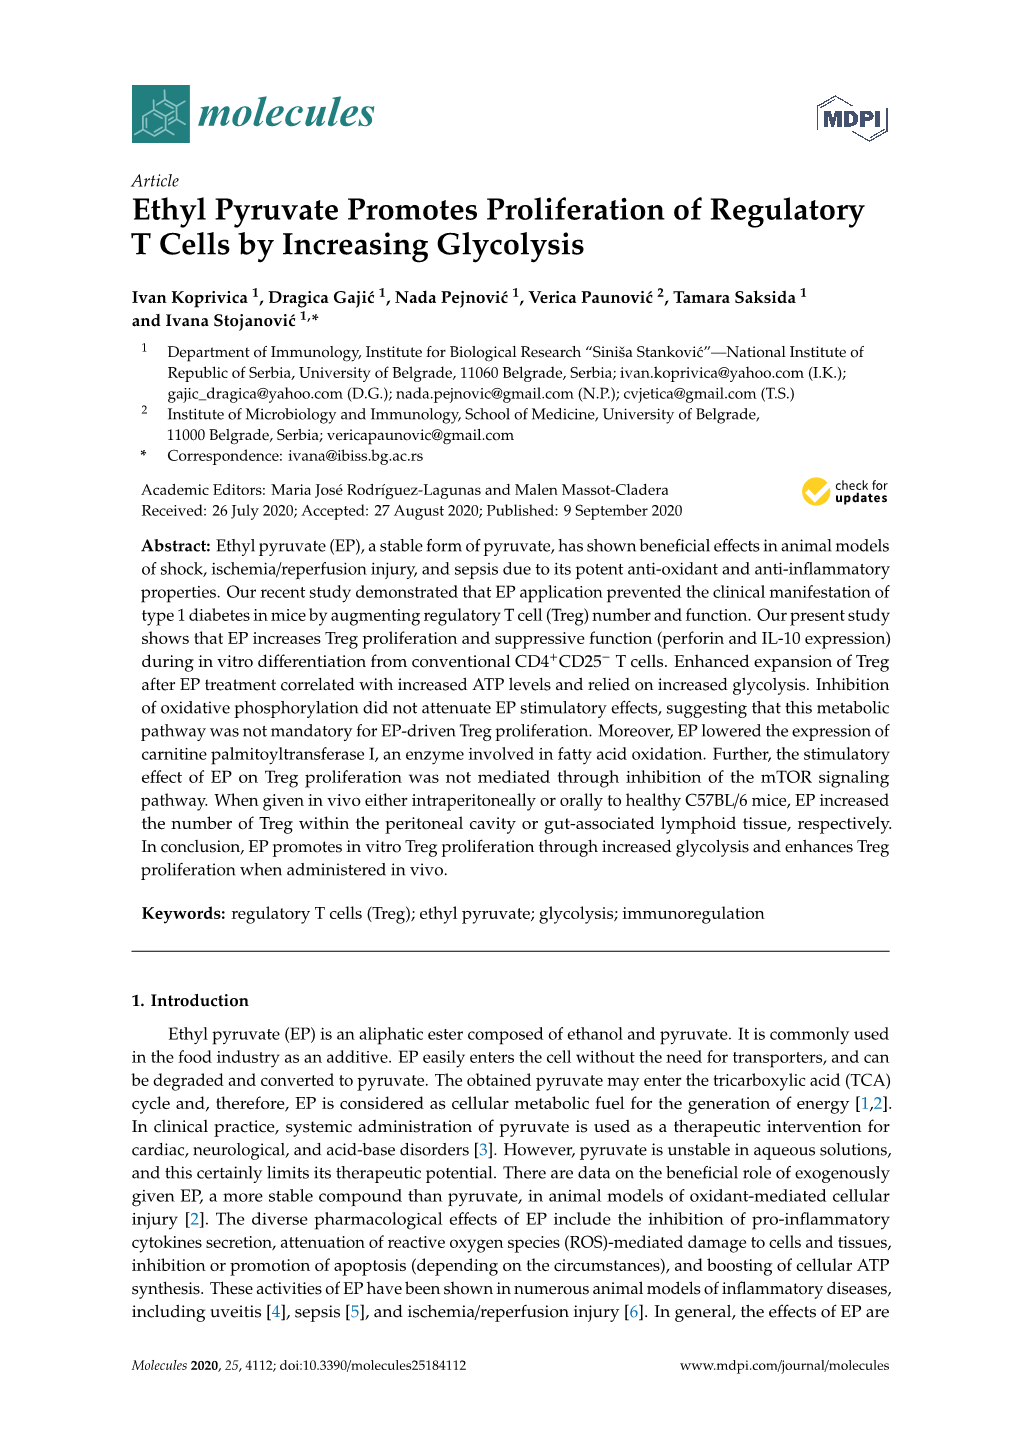 Ethyl Pyruvate Promotes Proliferation of Regulatory T Cells by Increasing Glycolysis